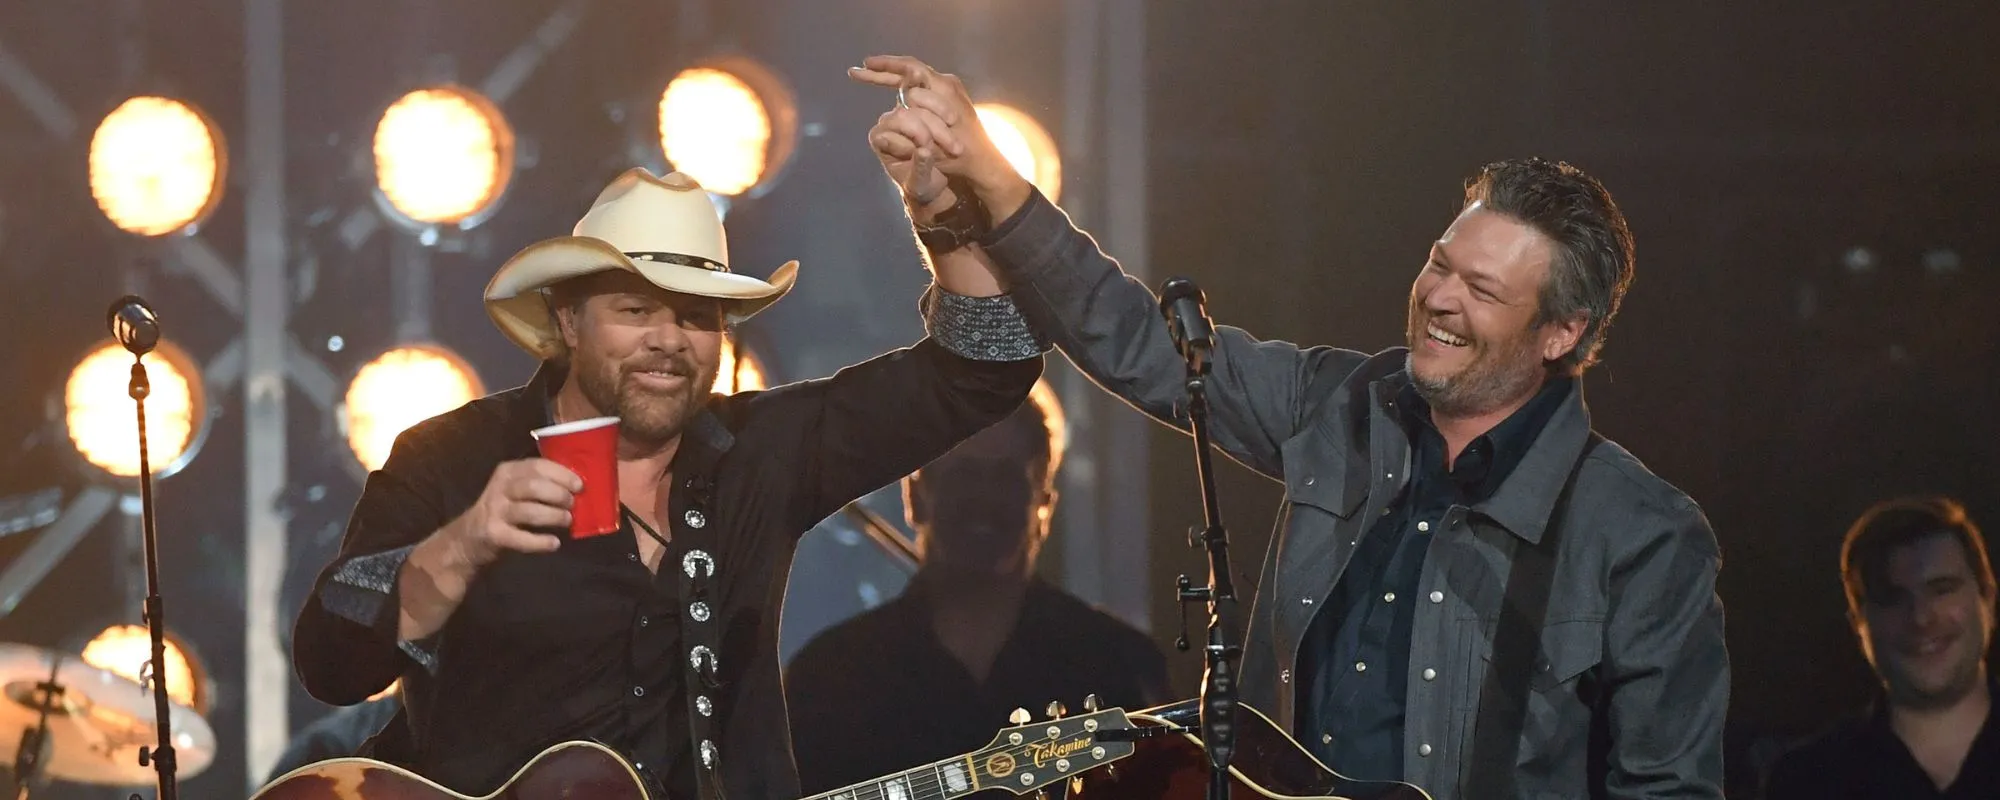 Toby Keith and Blake Shelton onstage together in April 2018.